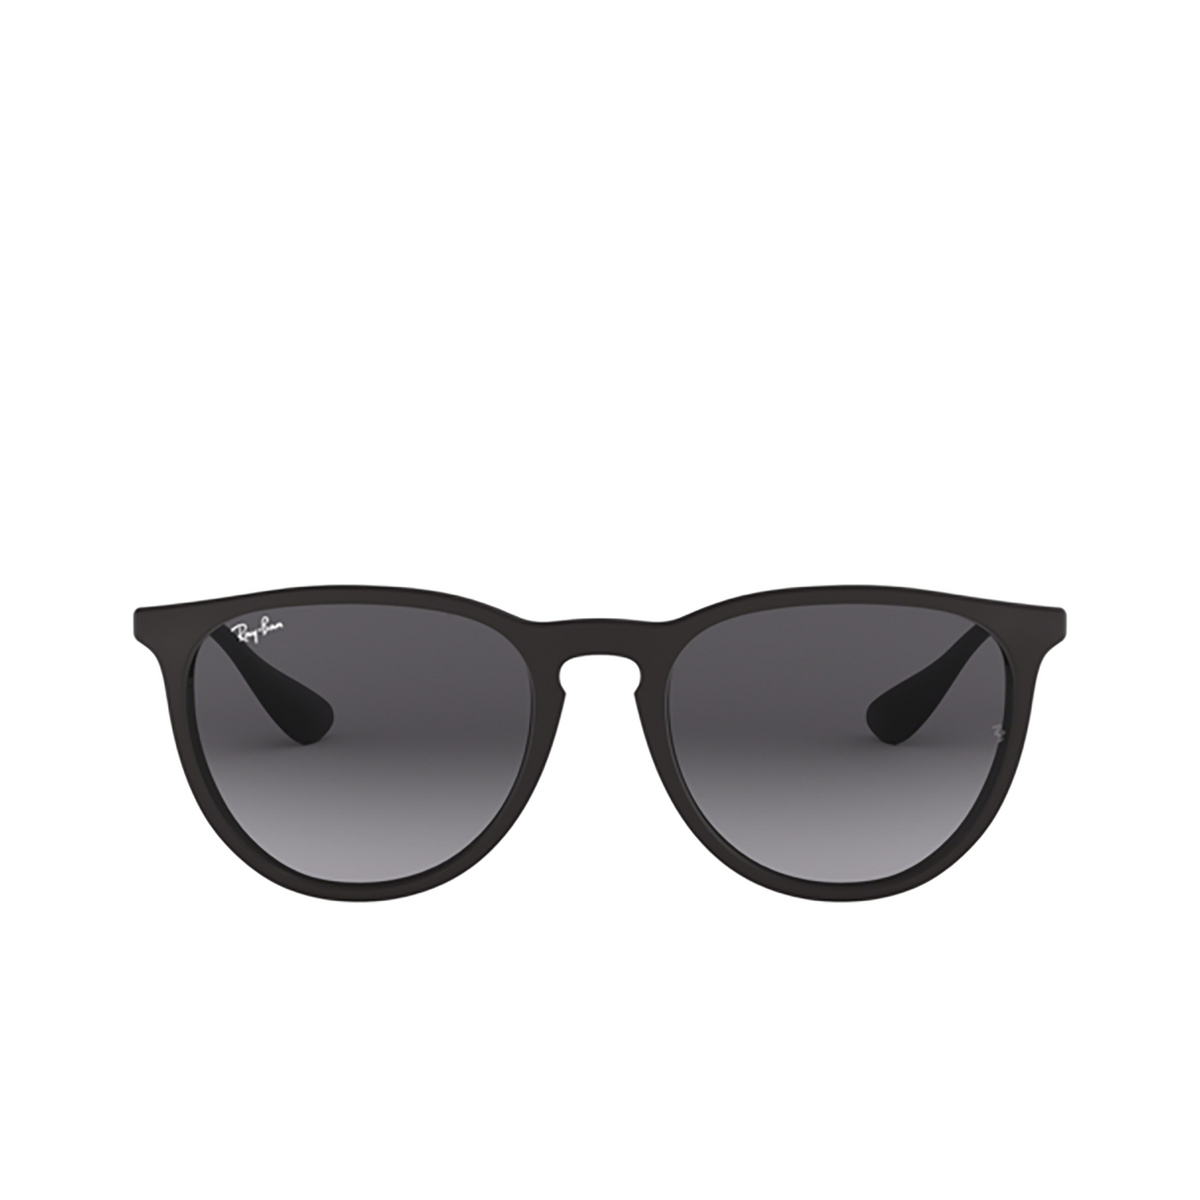 Ray-Ban ERIKA Sunglasses 622/8G RUBBER BLACK - front view